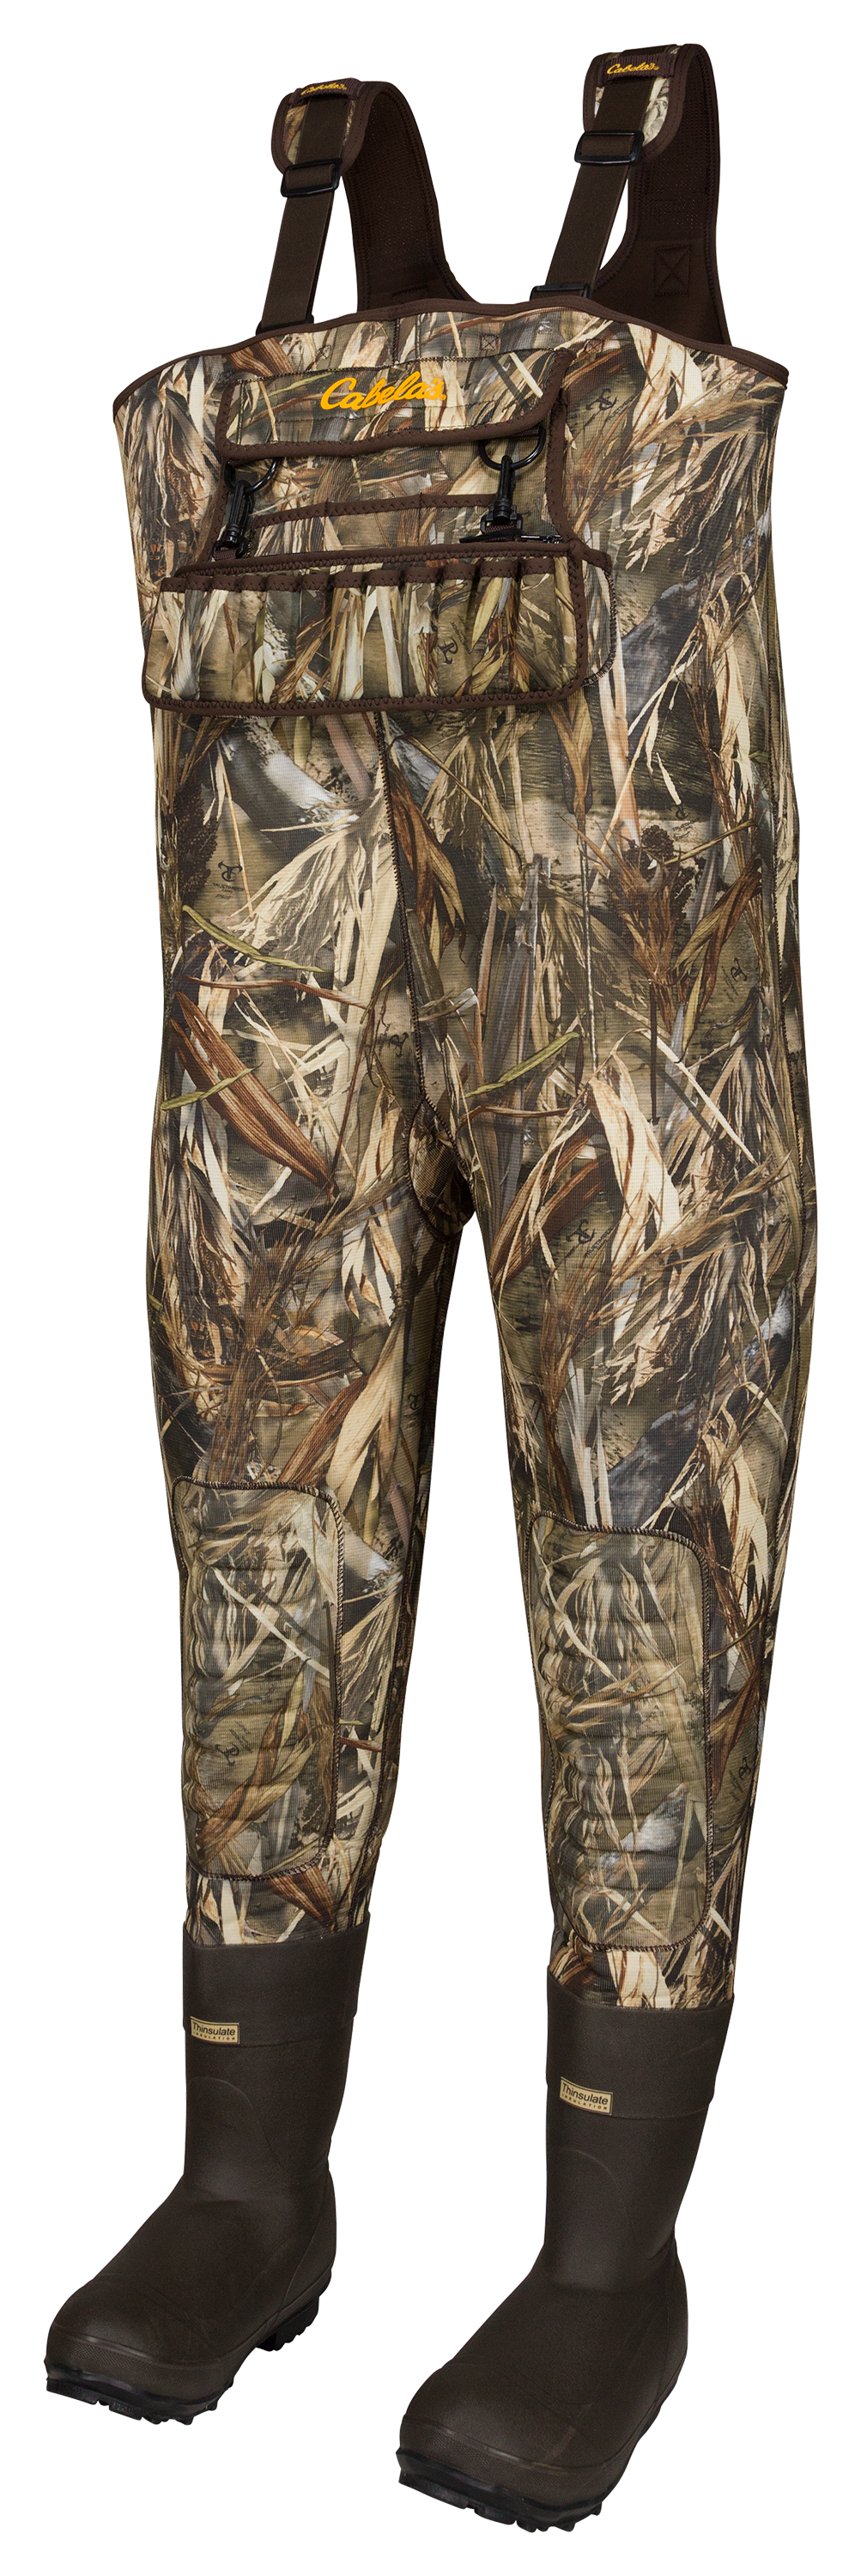 7 Best Waders For Big Guys And Tall Guys - Trout Steelhead And